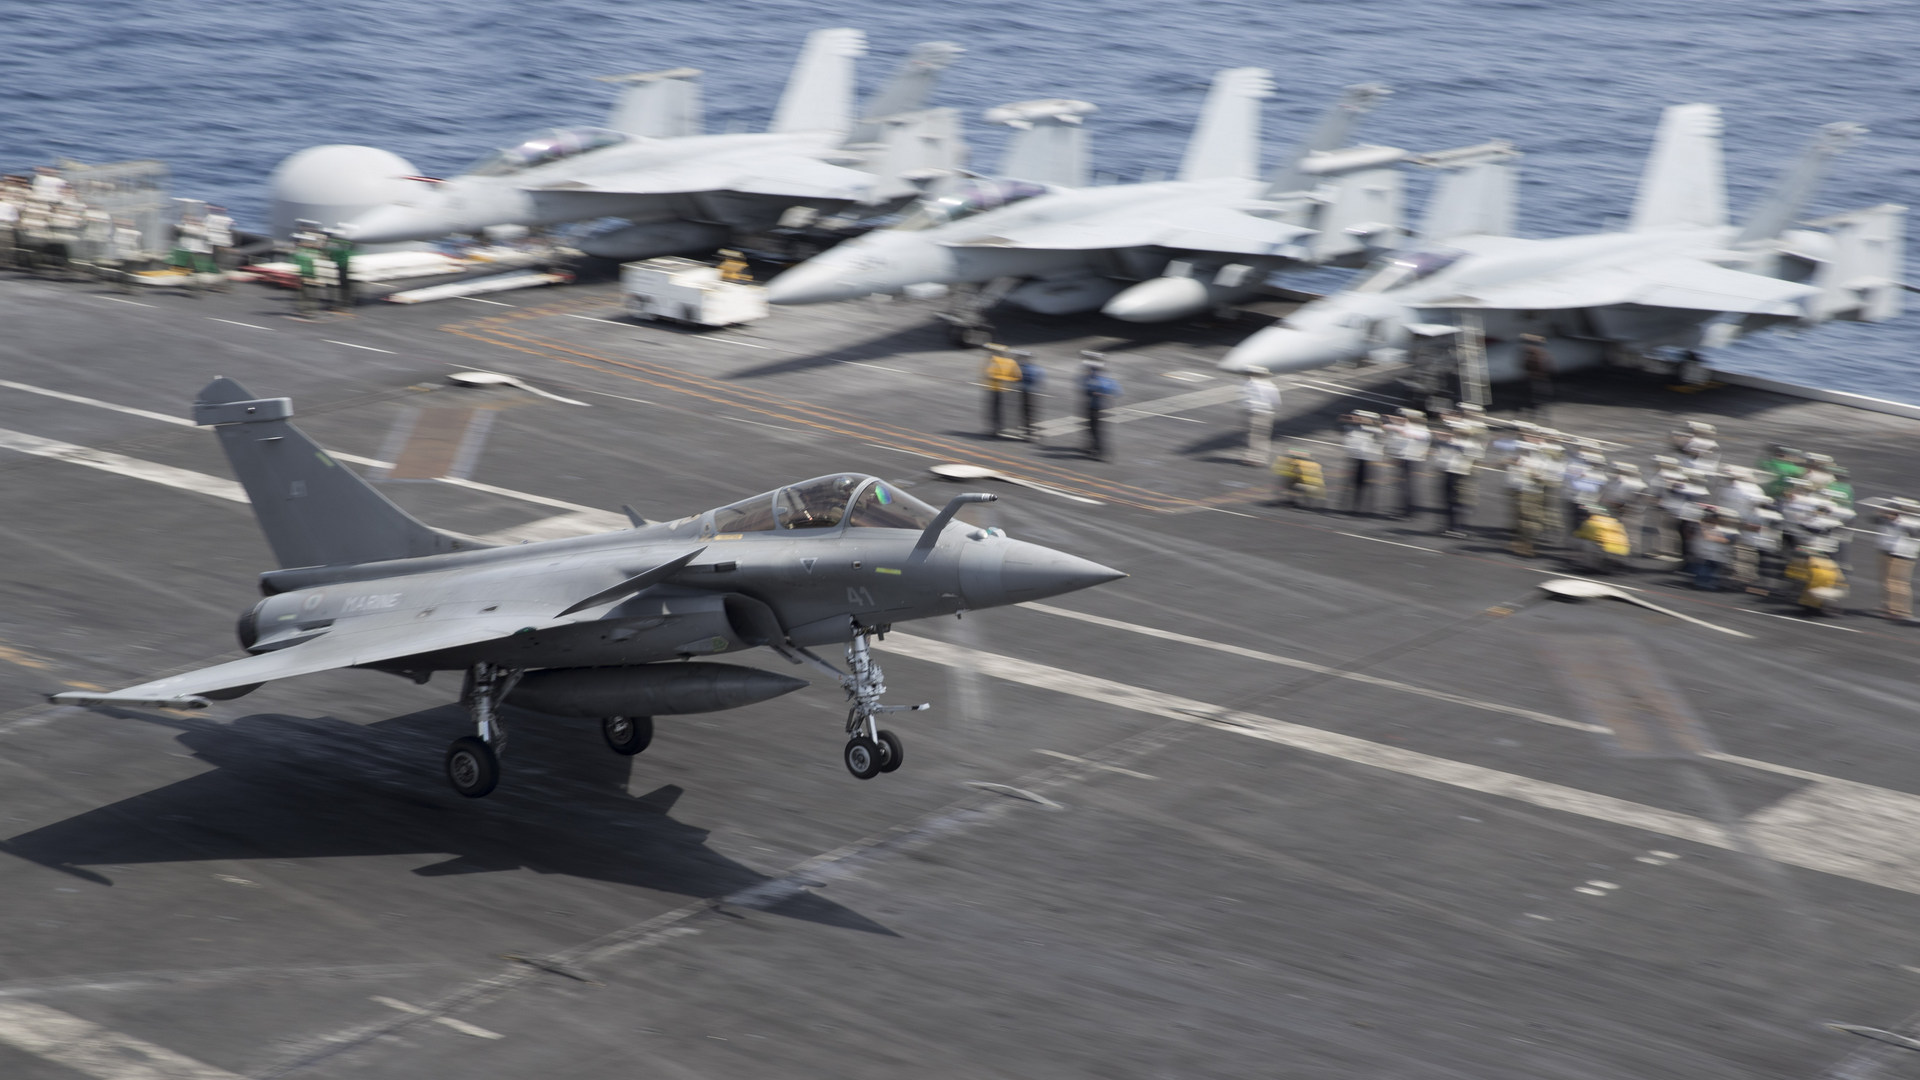 Atlantic Ocean (July 3, 2018) A French Dasault Rafale M Fighter prepares to land on the flight deck of the Nimitz-class aircraft carrier USS Harry S. Truman (CVN 75). Harry S. Truman is deployed as part of an ongoing rotation of U.S. forces supporting maritime security operations in international waters around the globe -- U.S. Navy photo by Mass Communication Specialist 3rd Class Gitte Schirrmacher. -